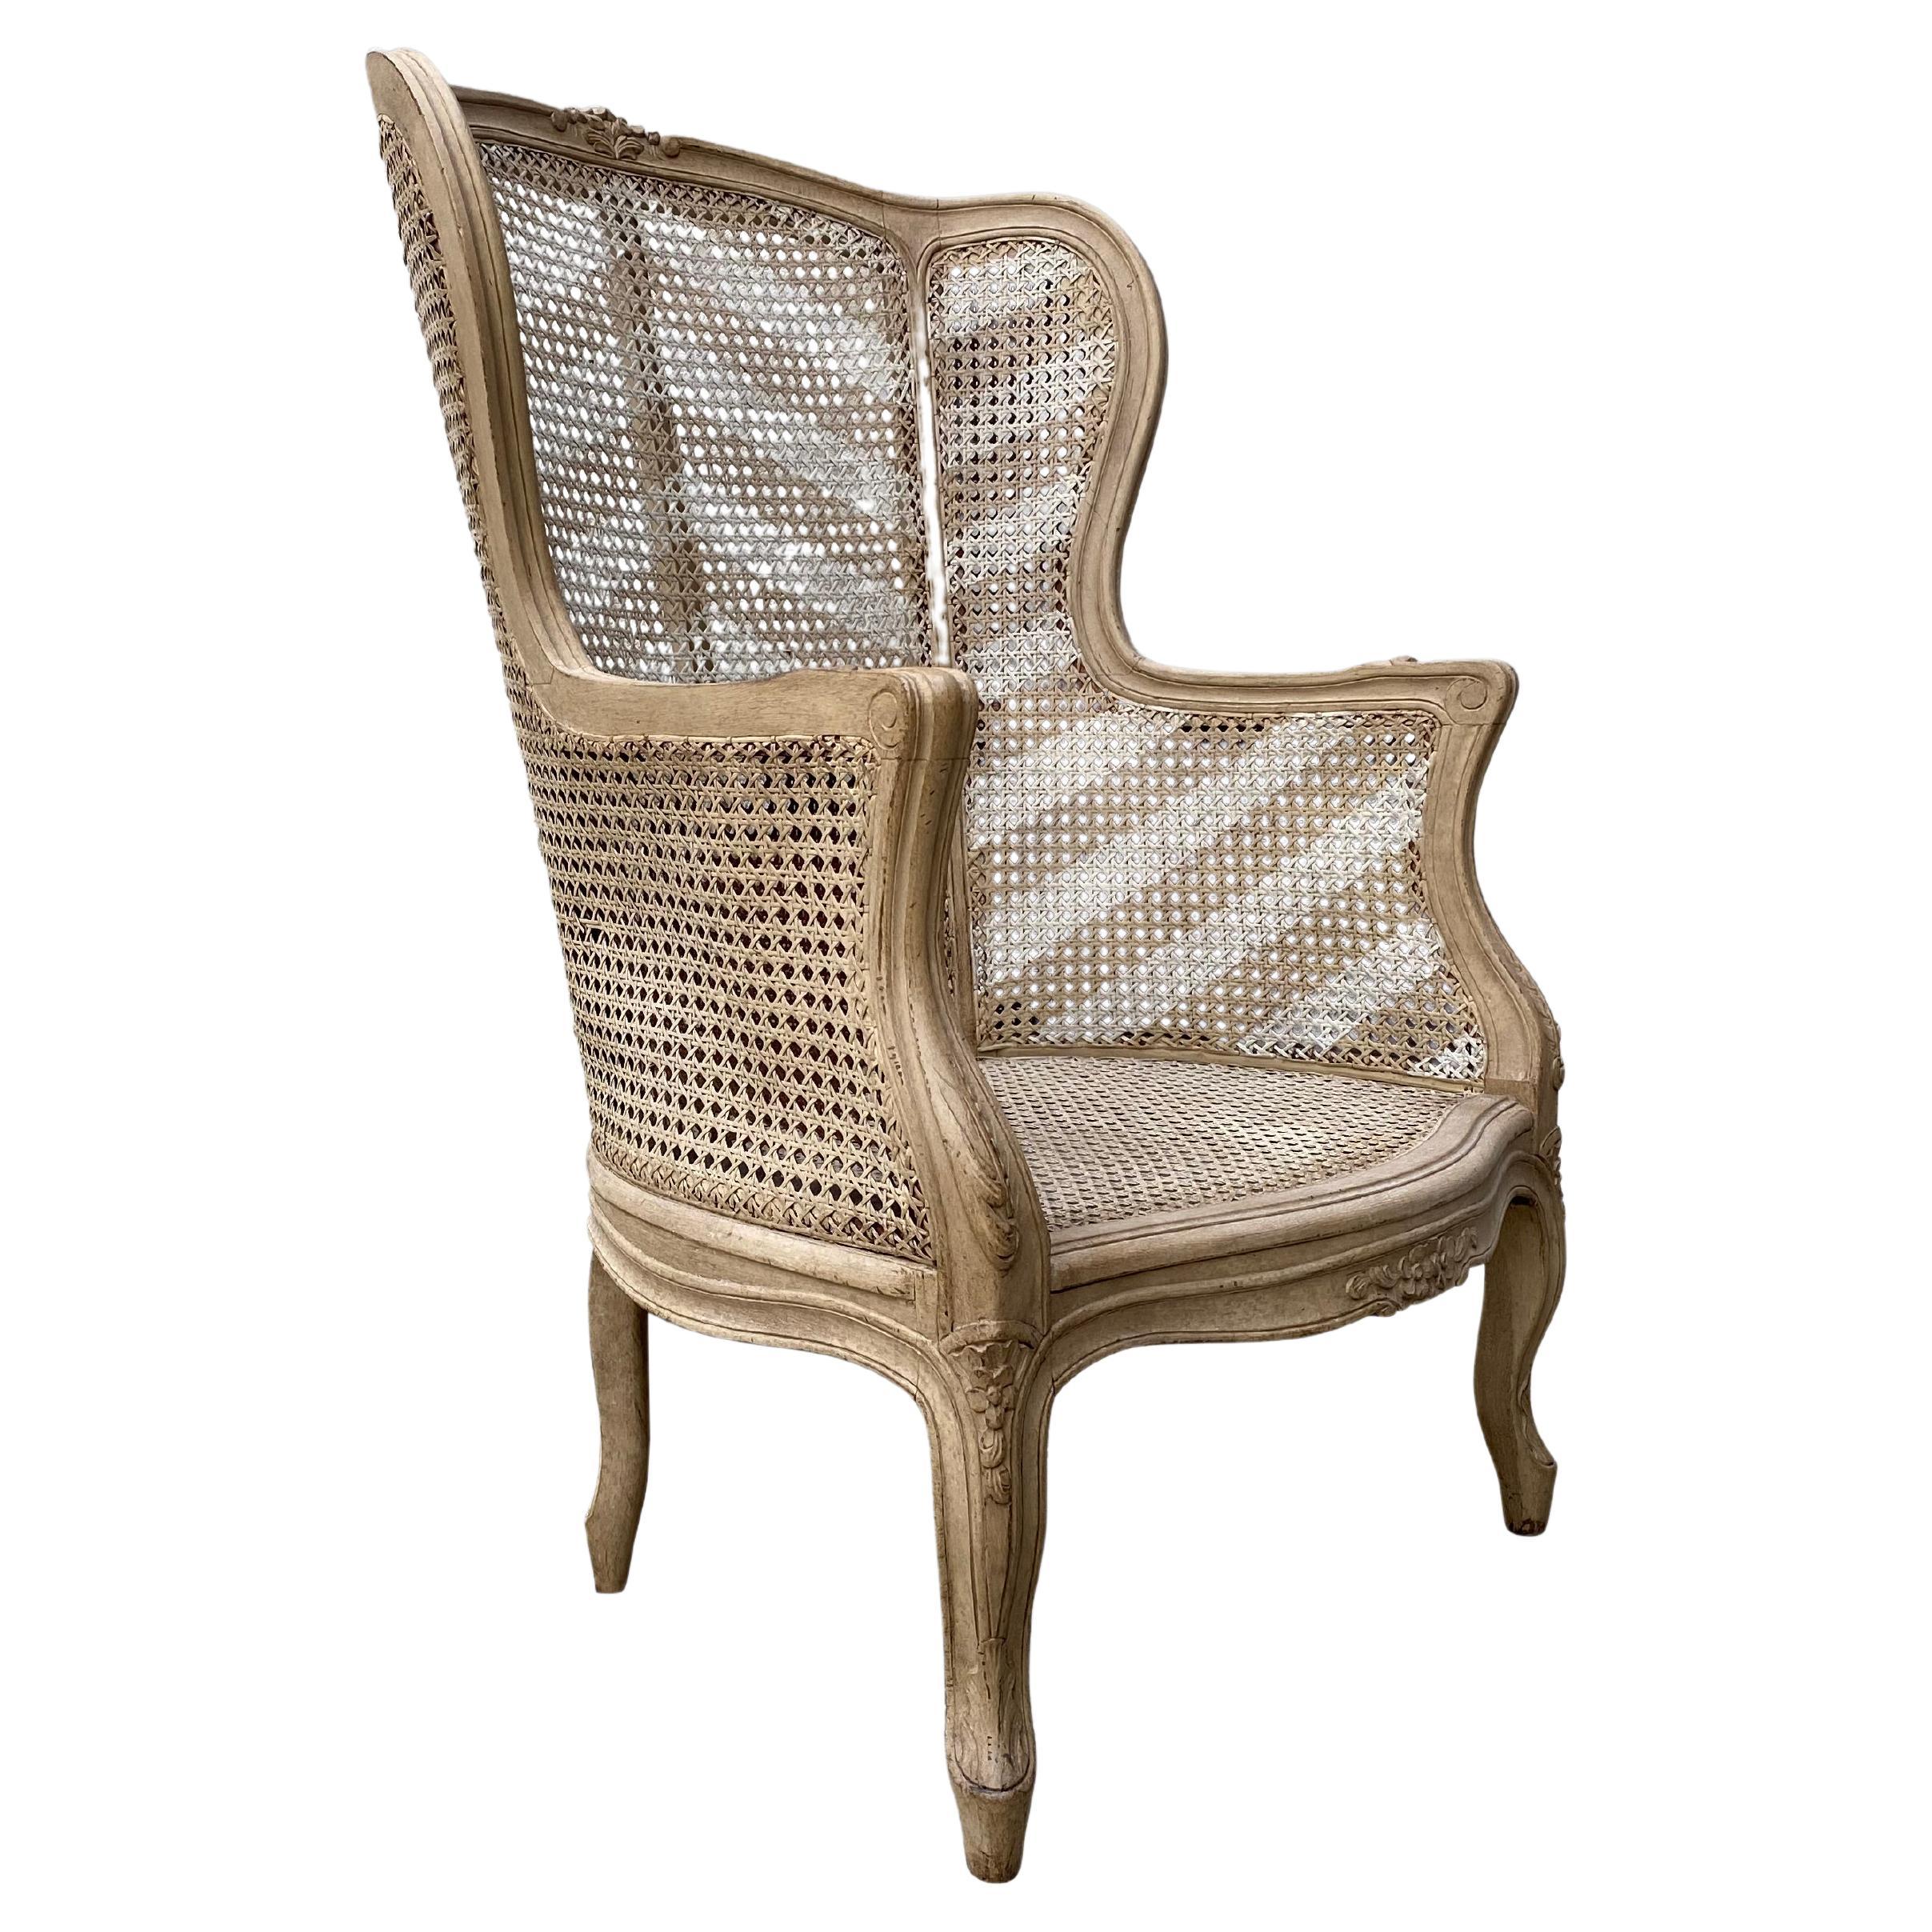 19th Century French Painted Double Caning Bergère Armchair